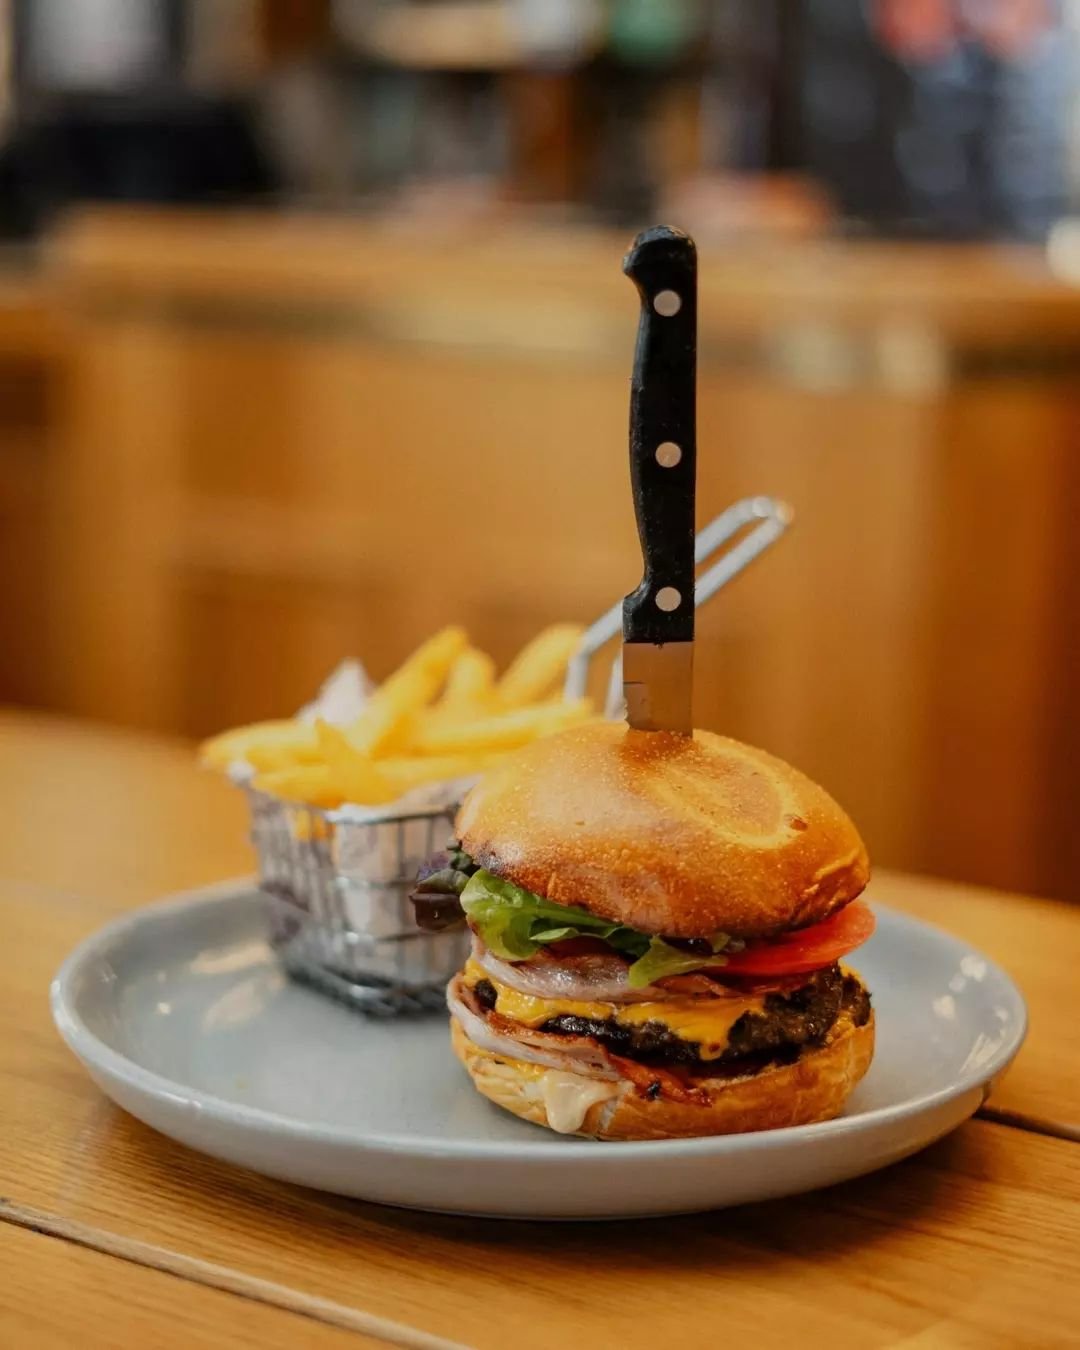 Head down to the Rose this week for our new lunch specials 🍔

Bring the whole family for our express lunch on weekdays! Indulge in the Black Angus Burger, for just $20 between 11am - 2pm.

For table bookings follow the link in our bio.